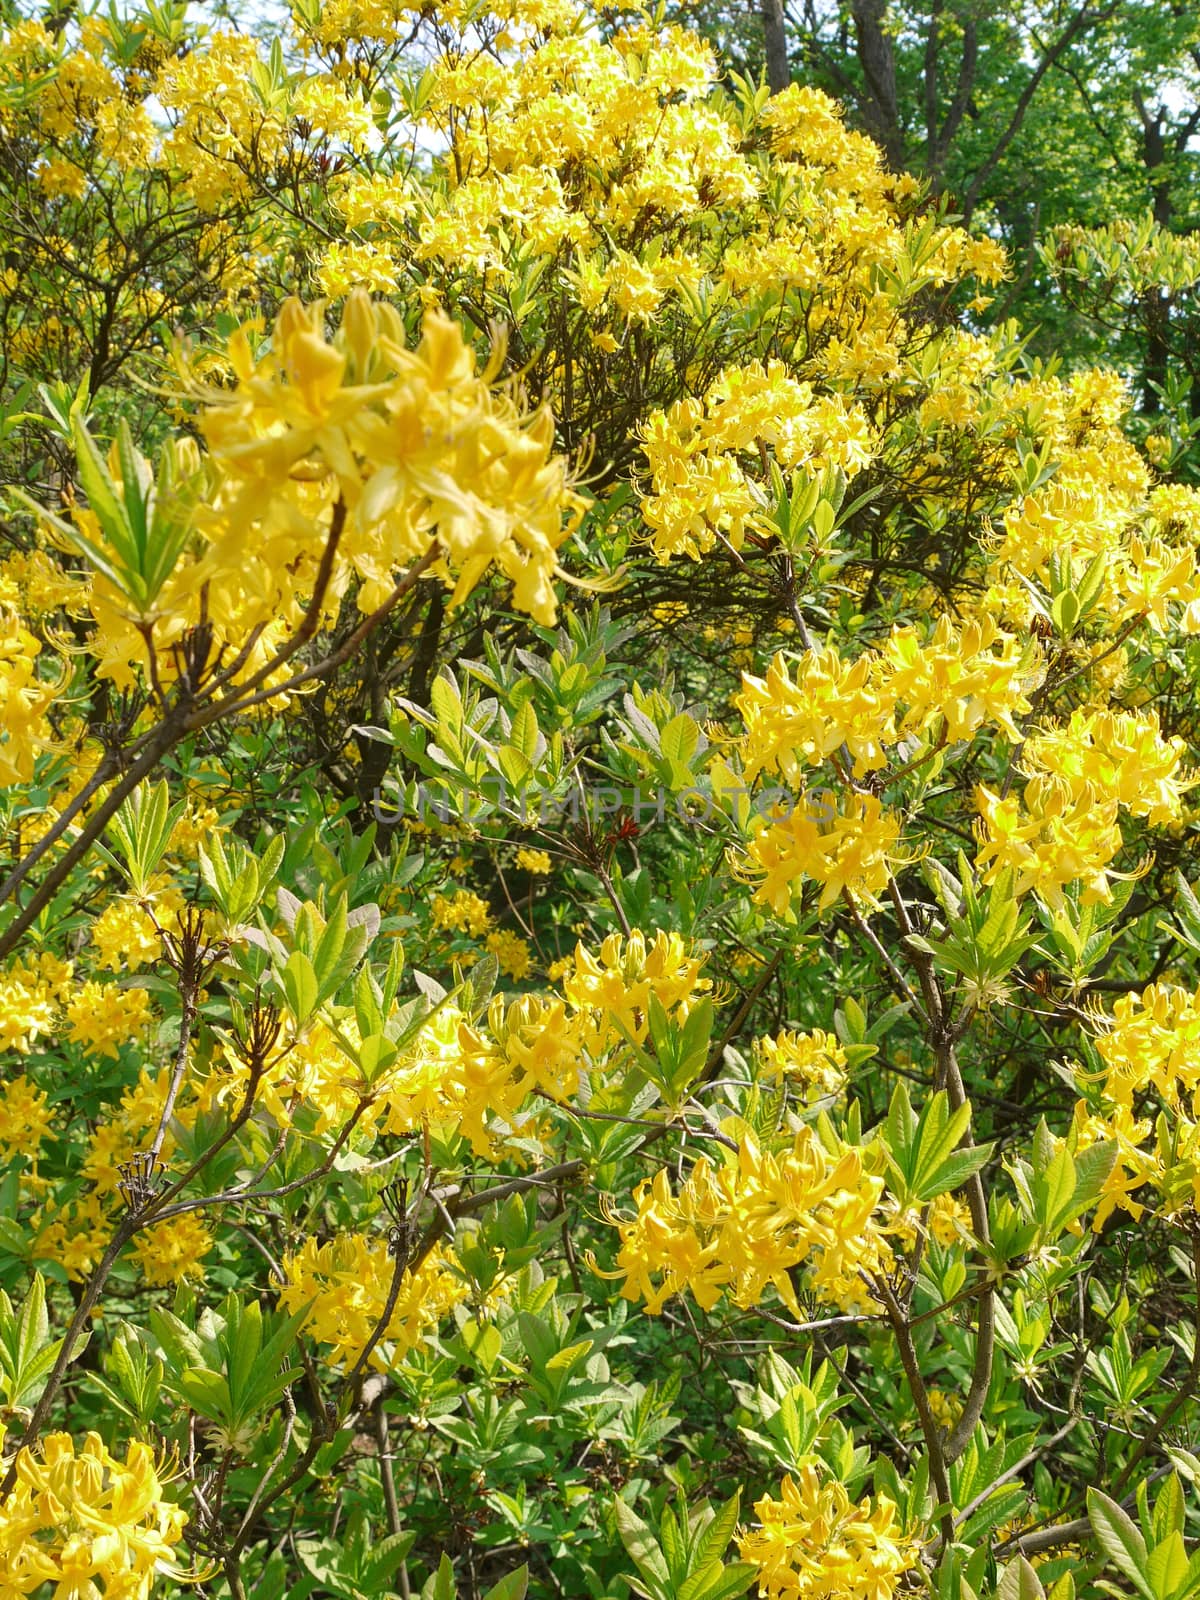 A tree with thick branches is colored by bright yellow flowers